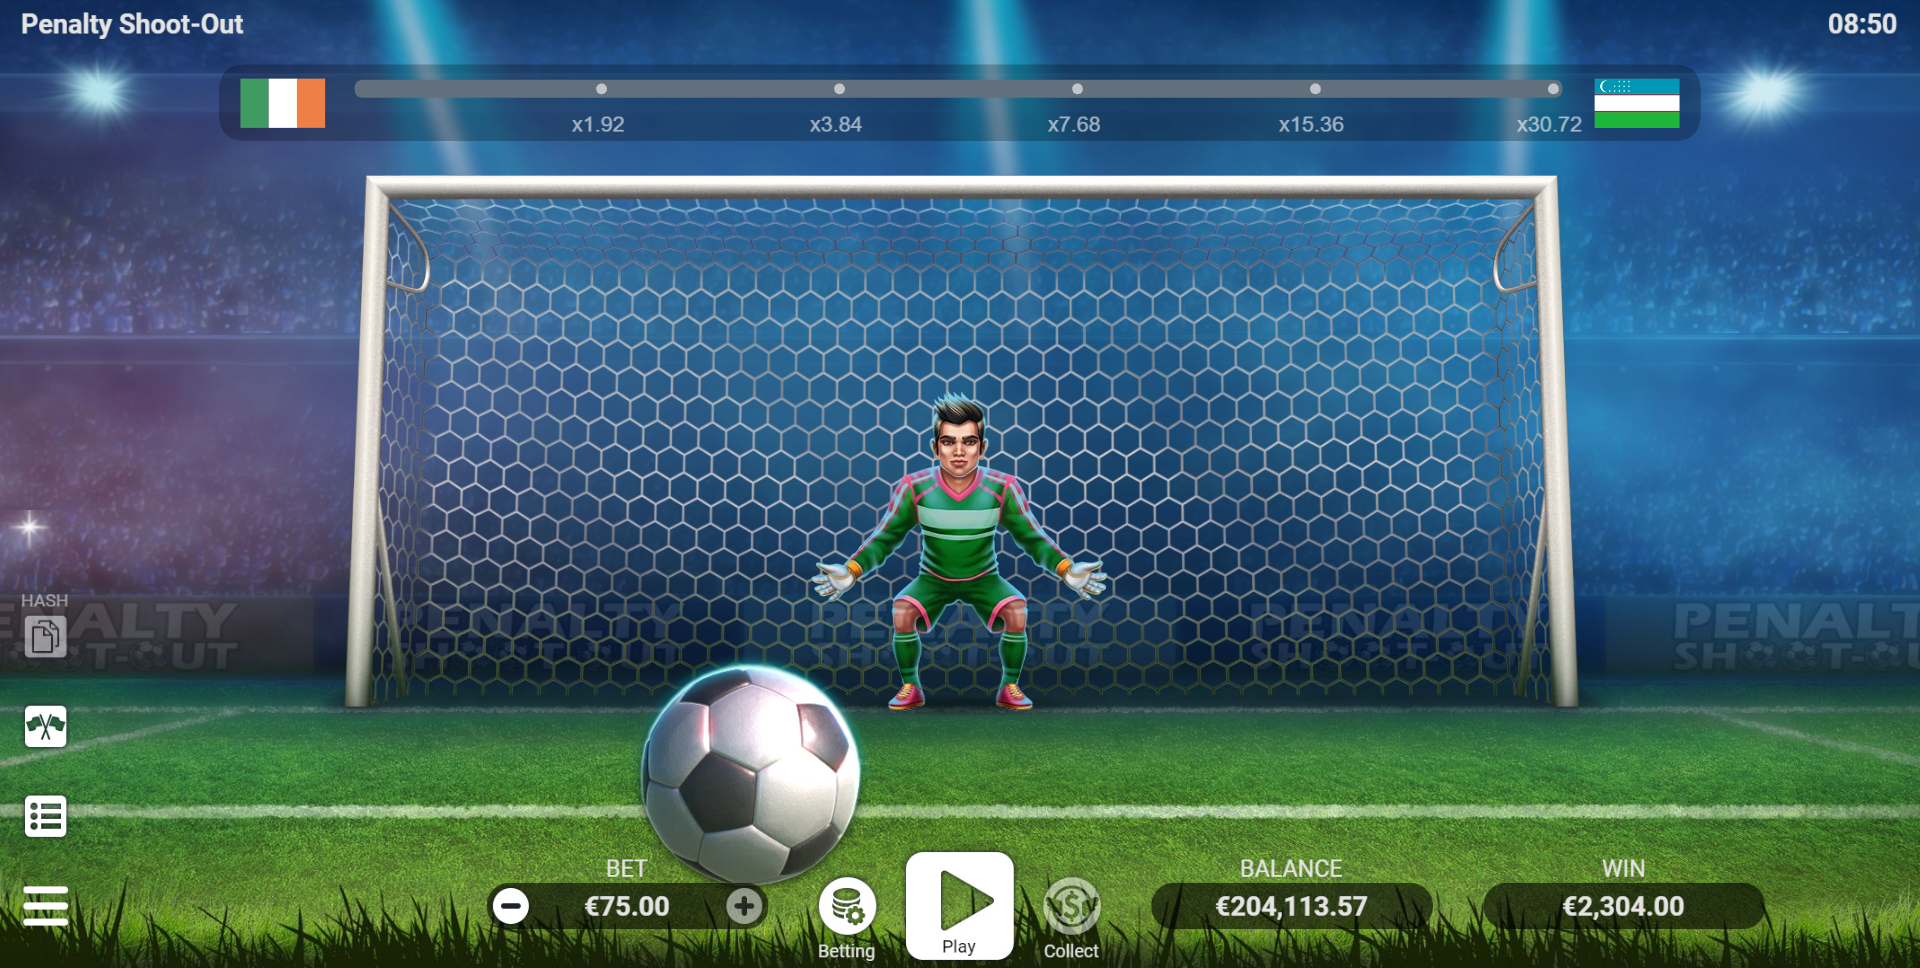 Penalty Shoot-Out by Evoplay Play Game Demo Online